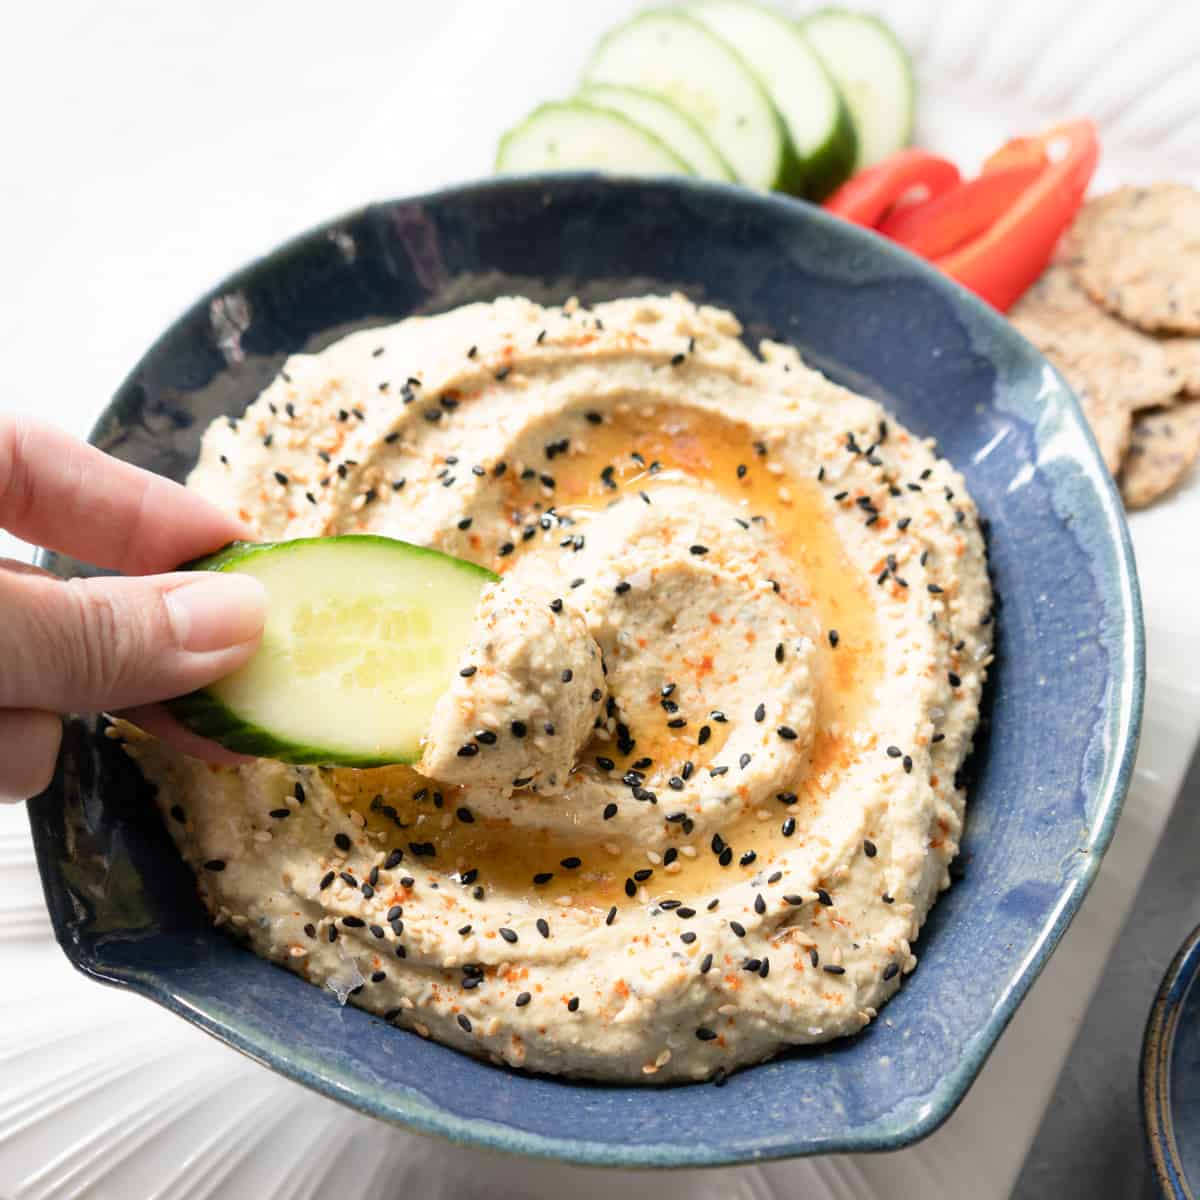 Prepared hummus in a blue dish with a hand dipping a slice of cucumber into it. 